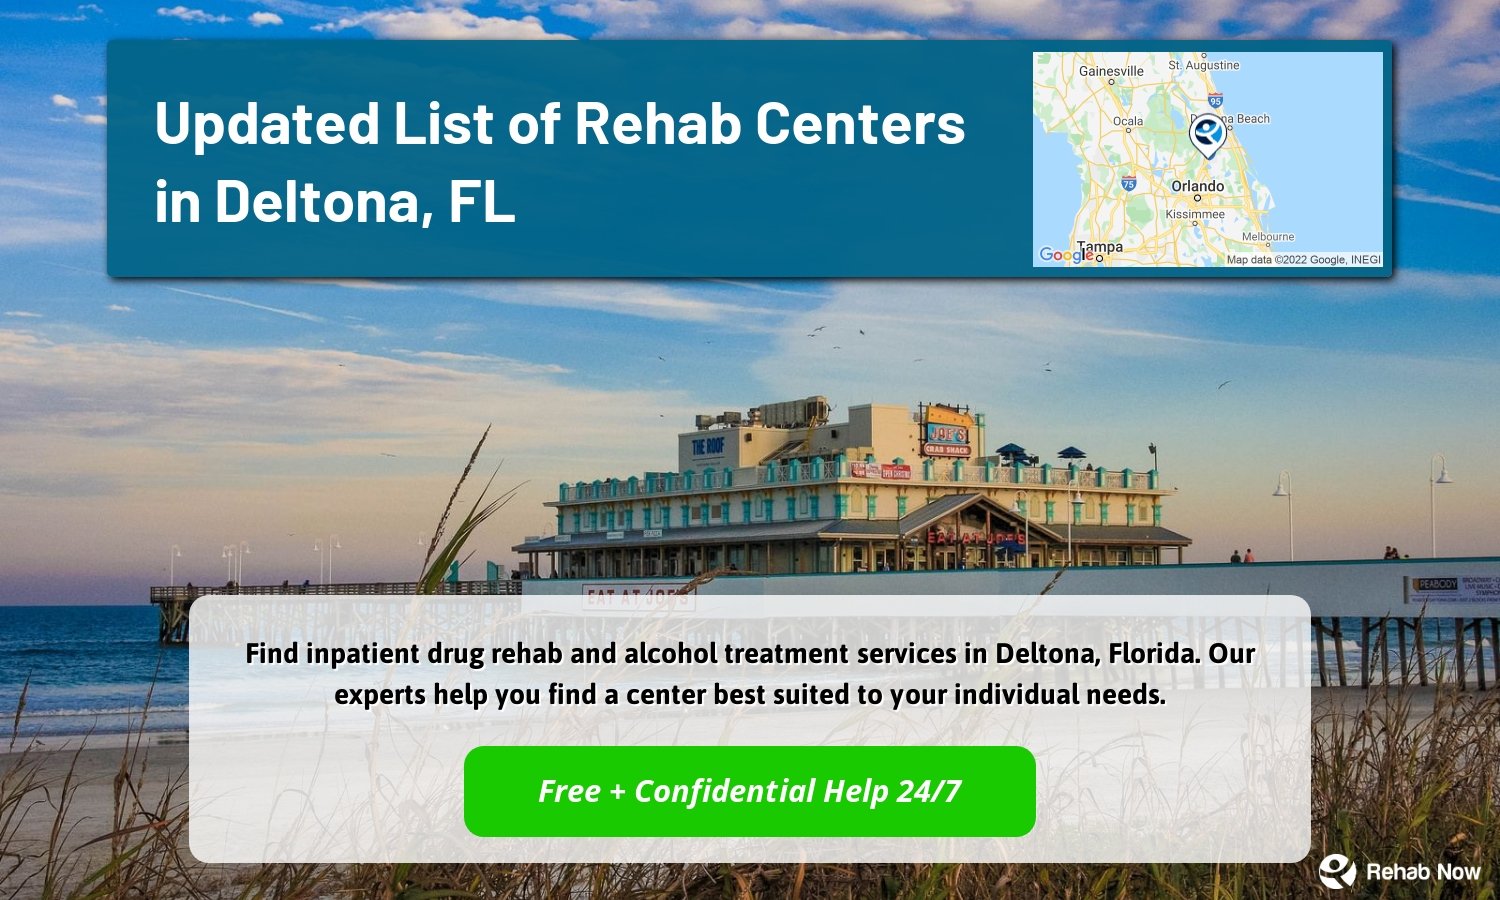 Find inpatient drug rehab and alcohol treatment services in Deltona, Florida. Our experts help you find a center best suited to your individual needs.